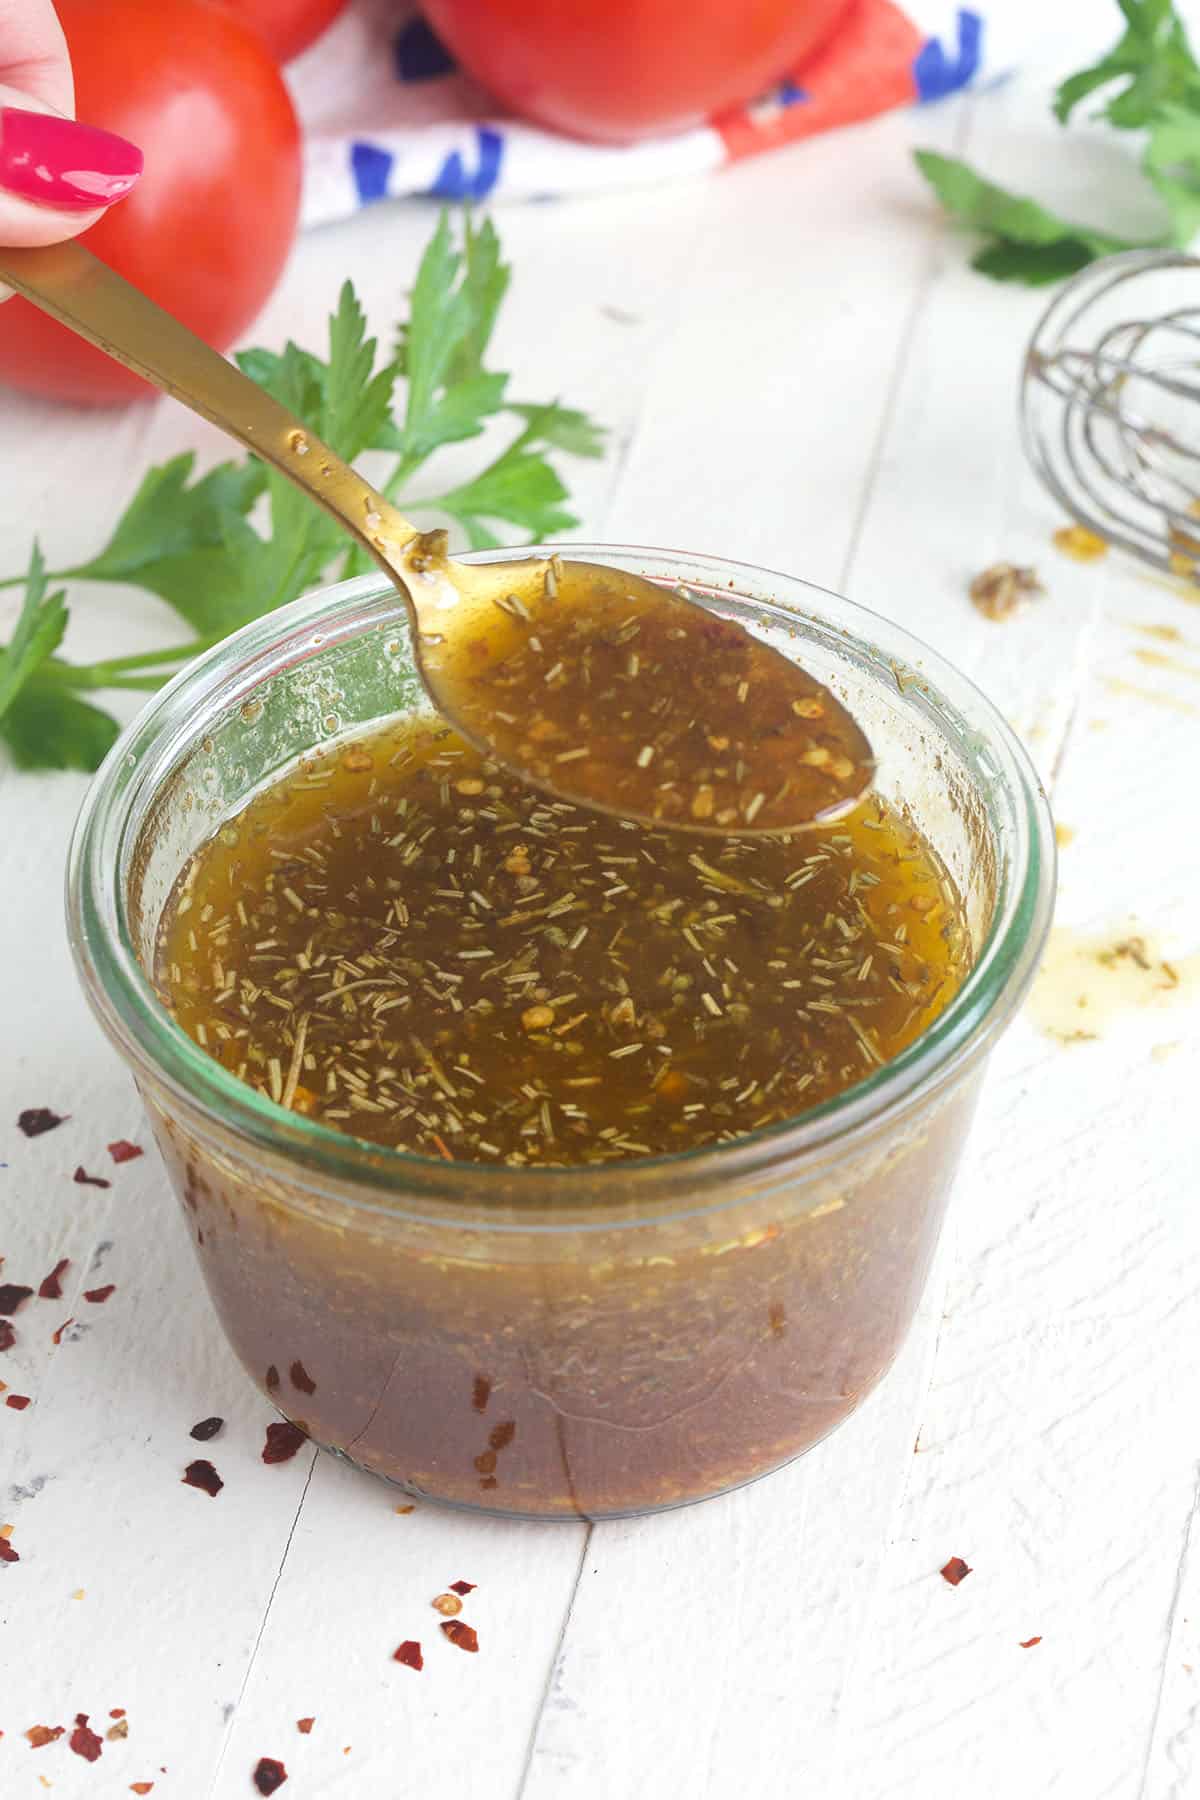 A spoon is lifting a small portion of Italian dressing out of a jar.